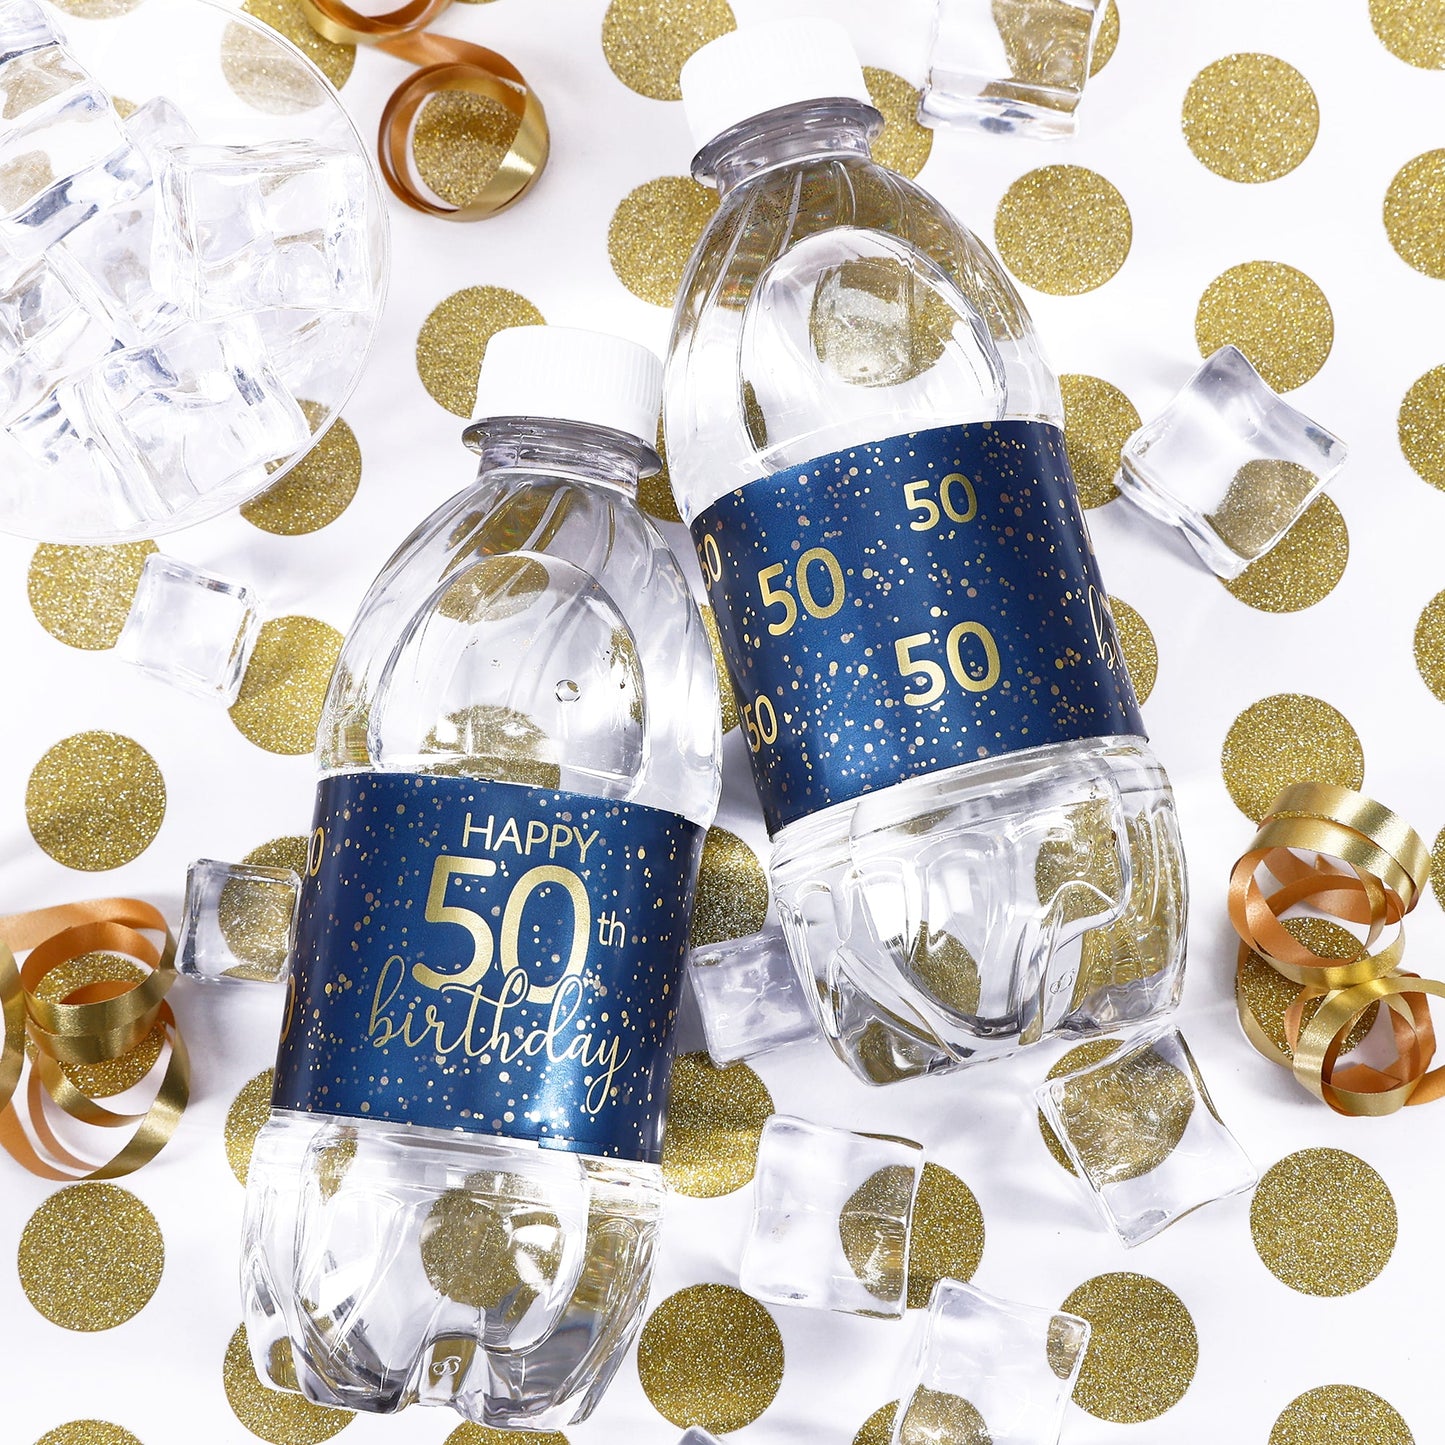 A group of water bottles with elegant navy blue and gold labels that are customized for an 50th birthday celebration, perfect for adding a personalized touch to any party